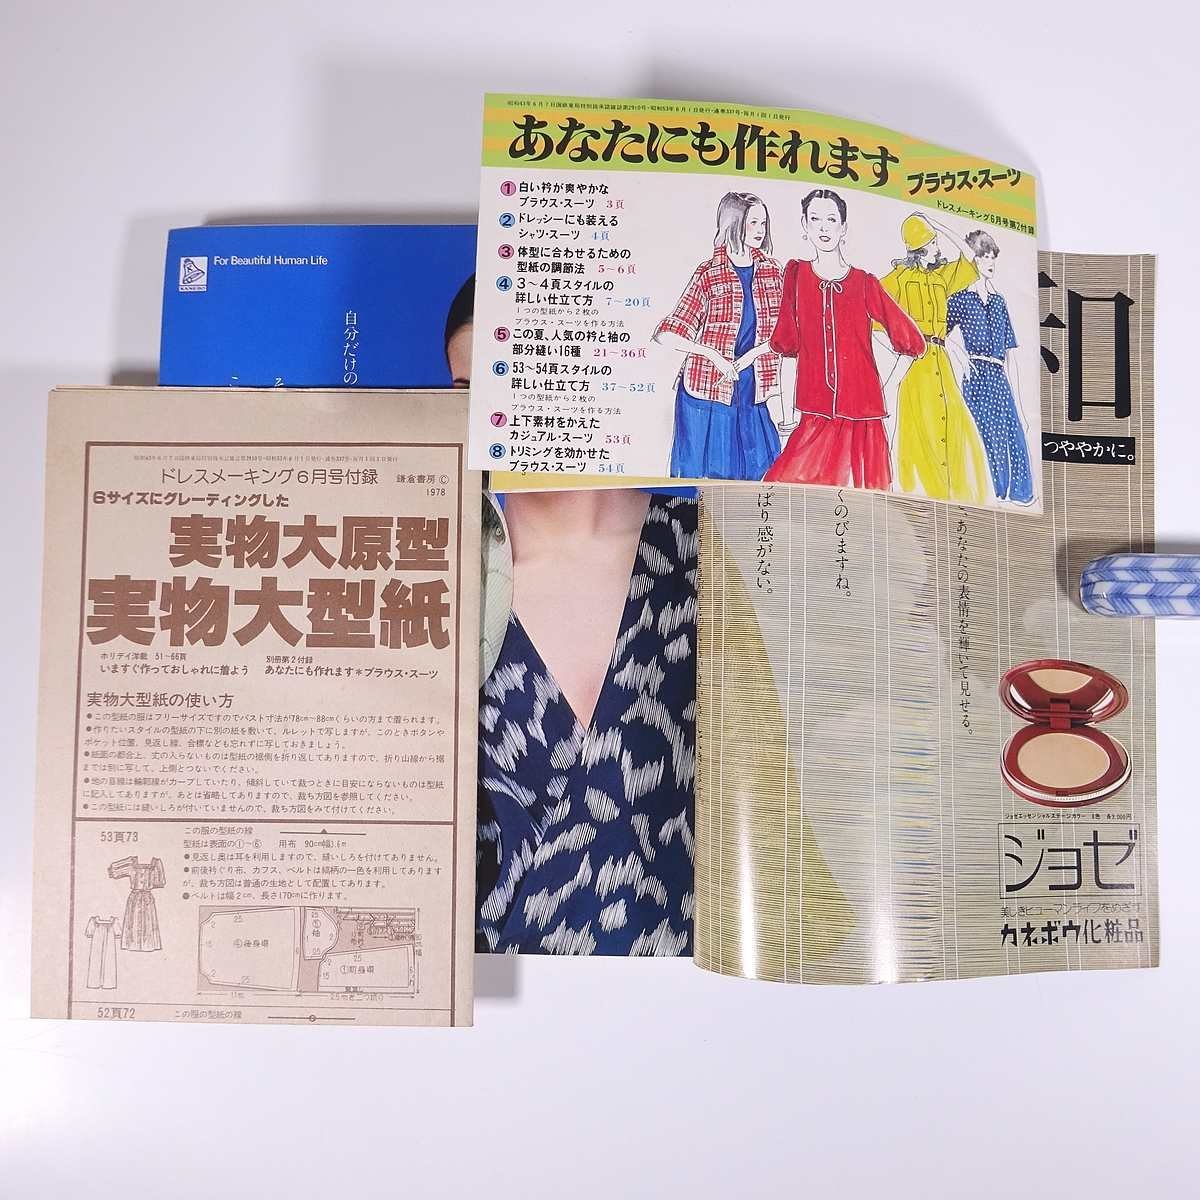  dress me- King No.337 1978/7 sickle . bookstore magazine handicrafts sewing dressmaking the first summer. street put on * the truth thing large paper you also work .. * blouse * suit another 